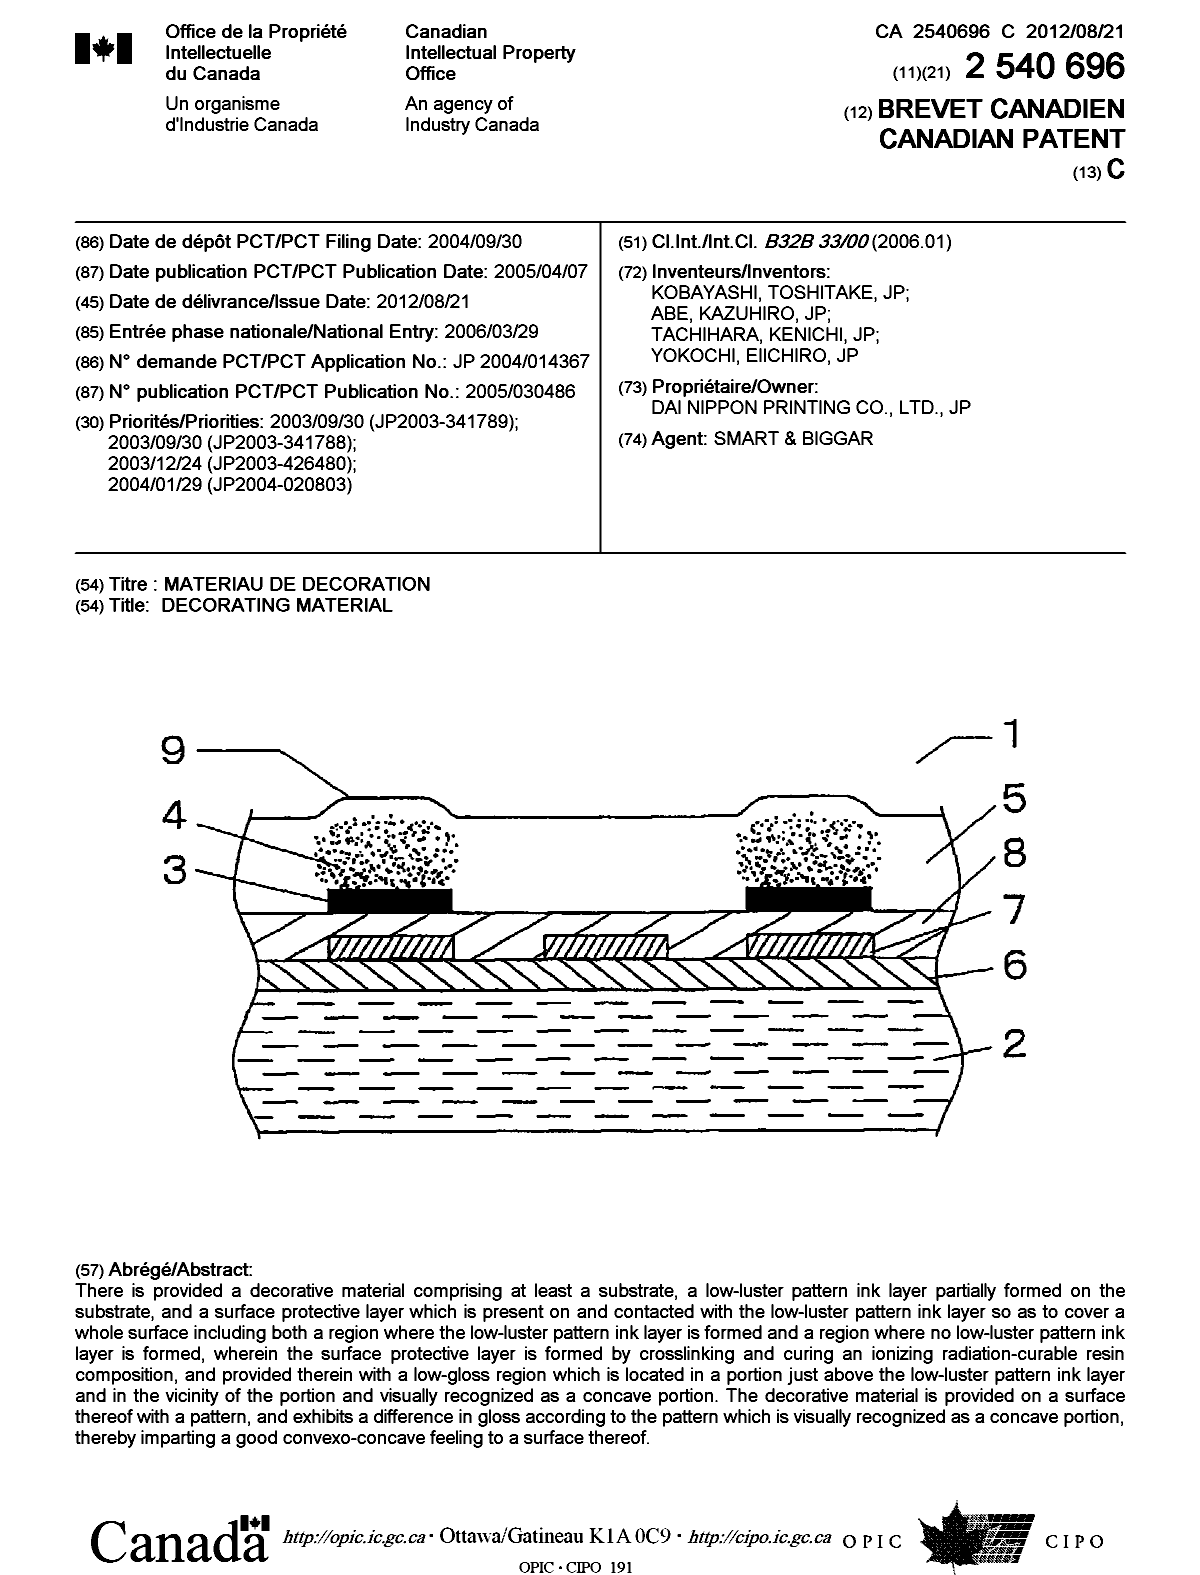 Canadian Patent Document 2540696. Cover Page 20120730. Image 1 of 1